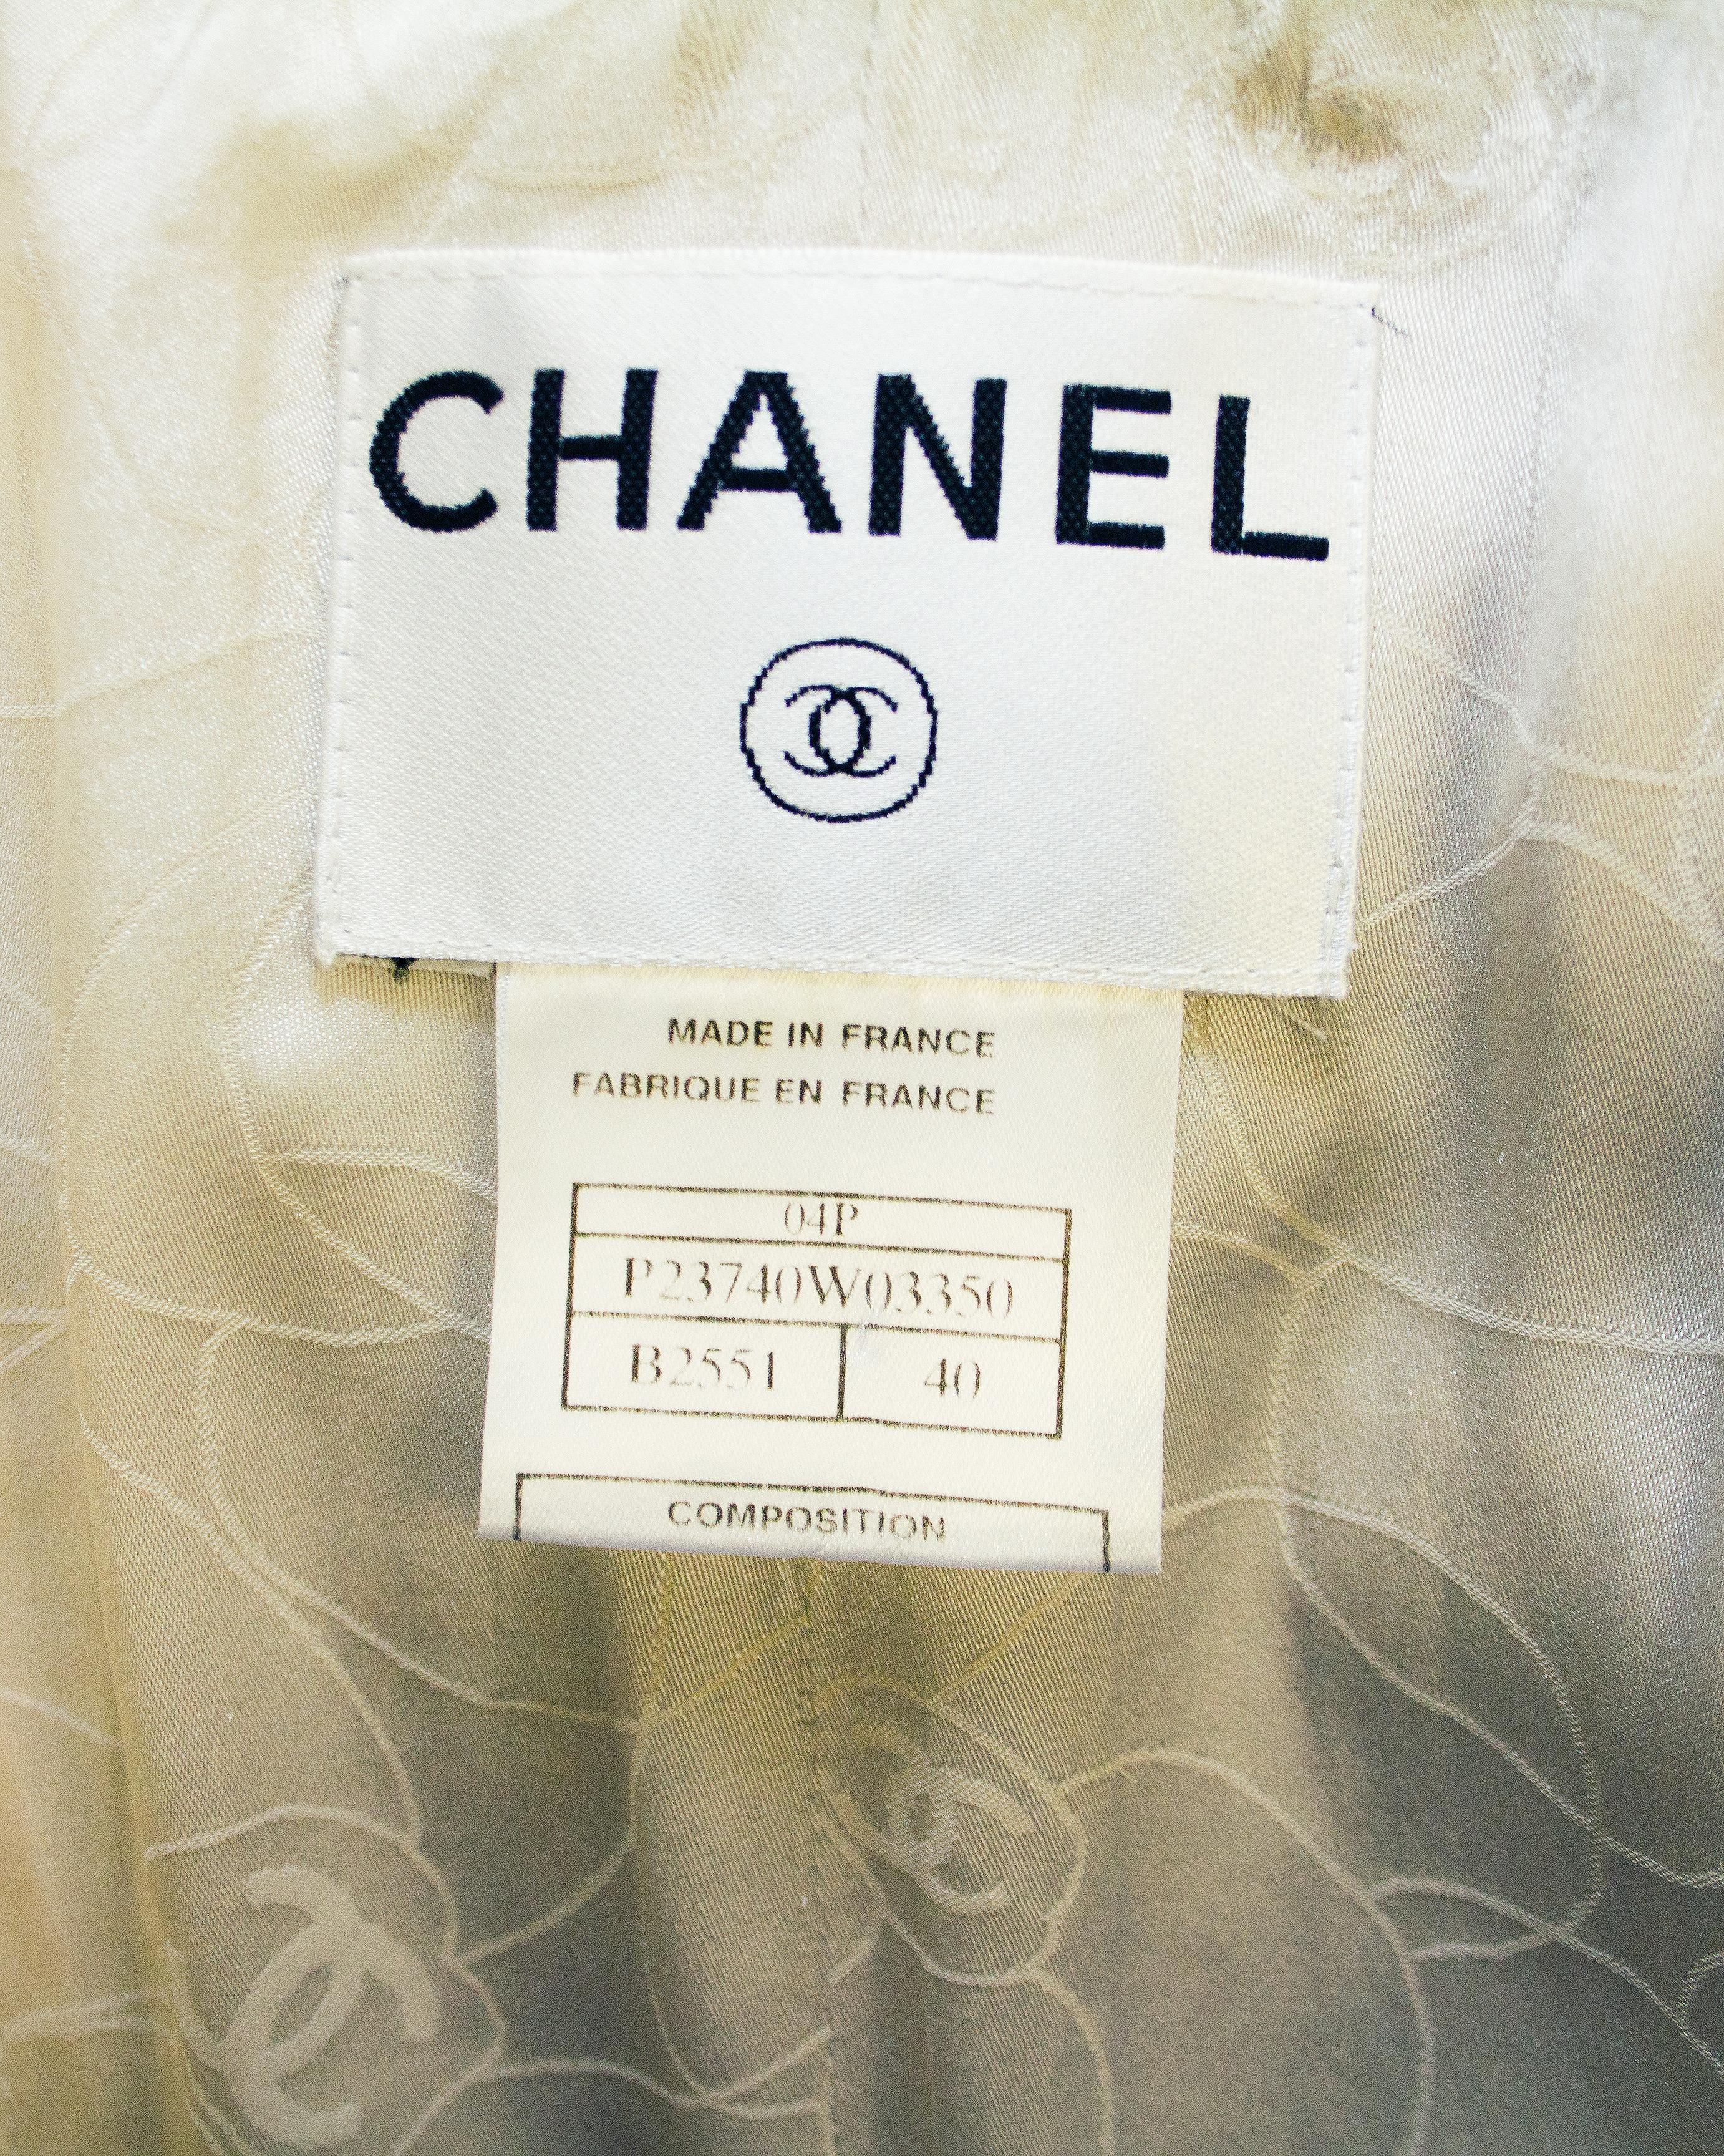 Spring 2004 Chanel Pale Pink Tweed Skirt Suit with Fringe Trim  4